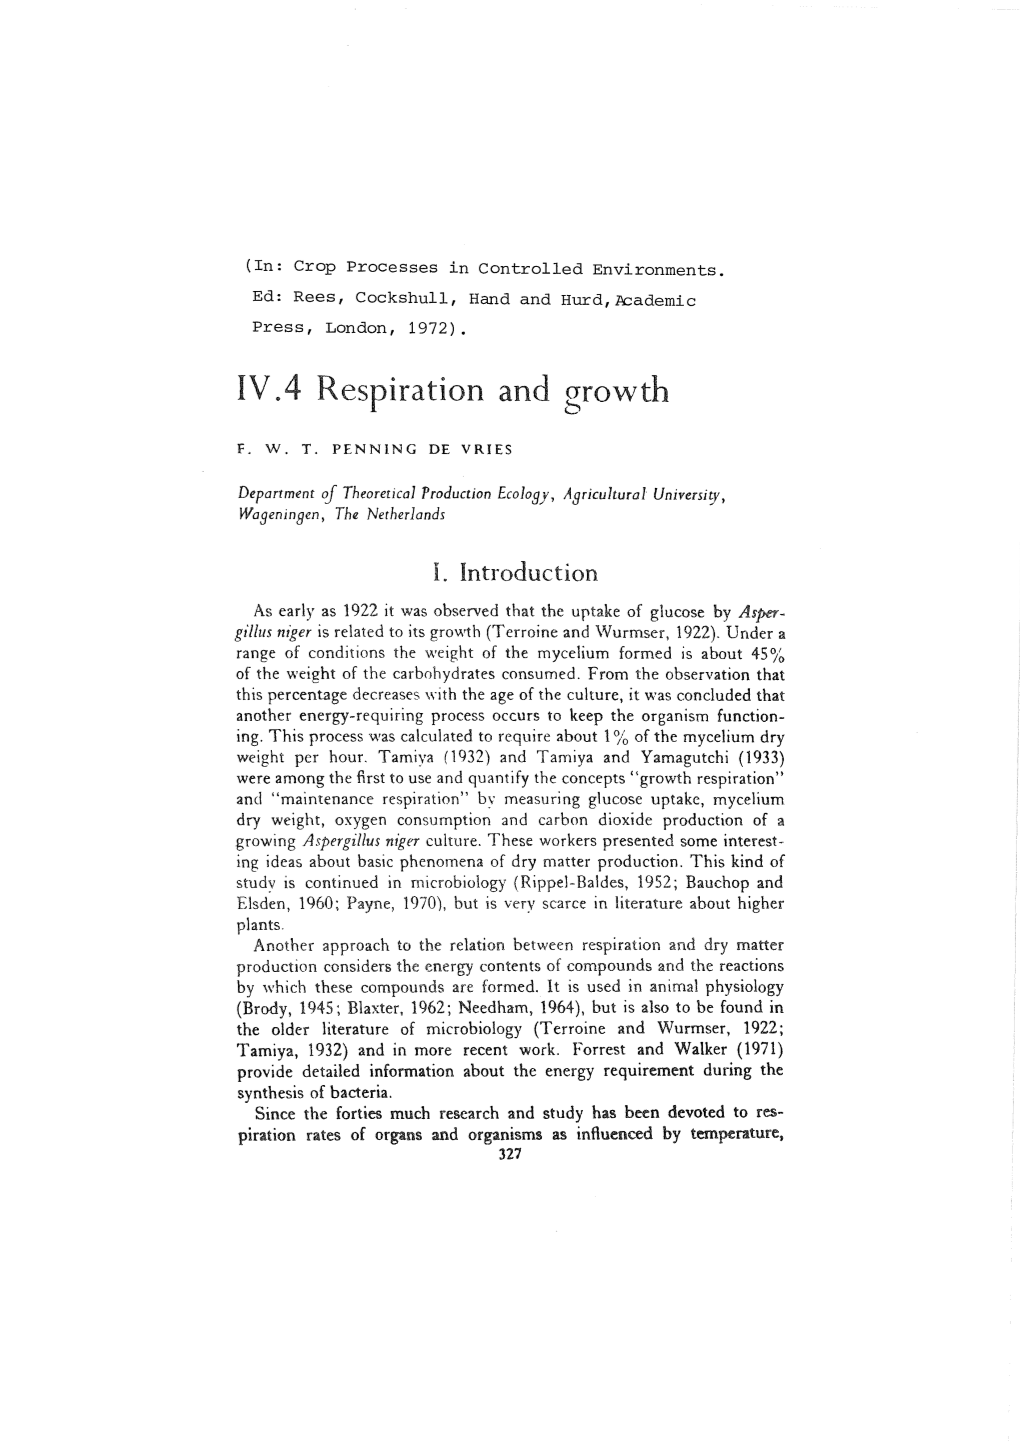 IV .4 Respiration and Growth